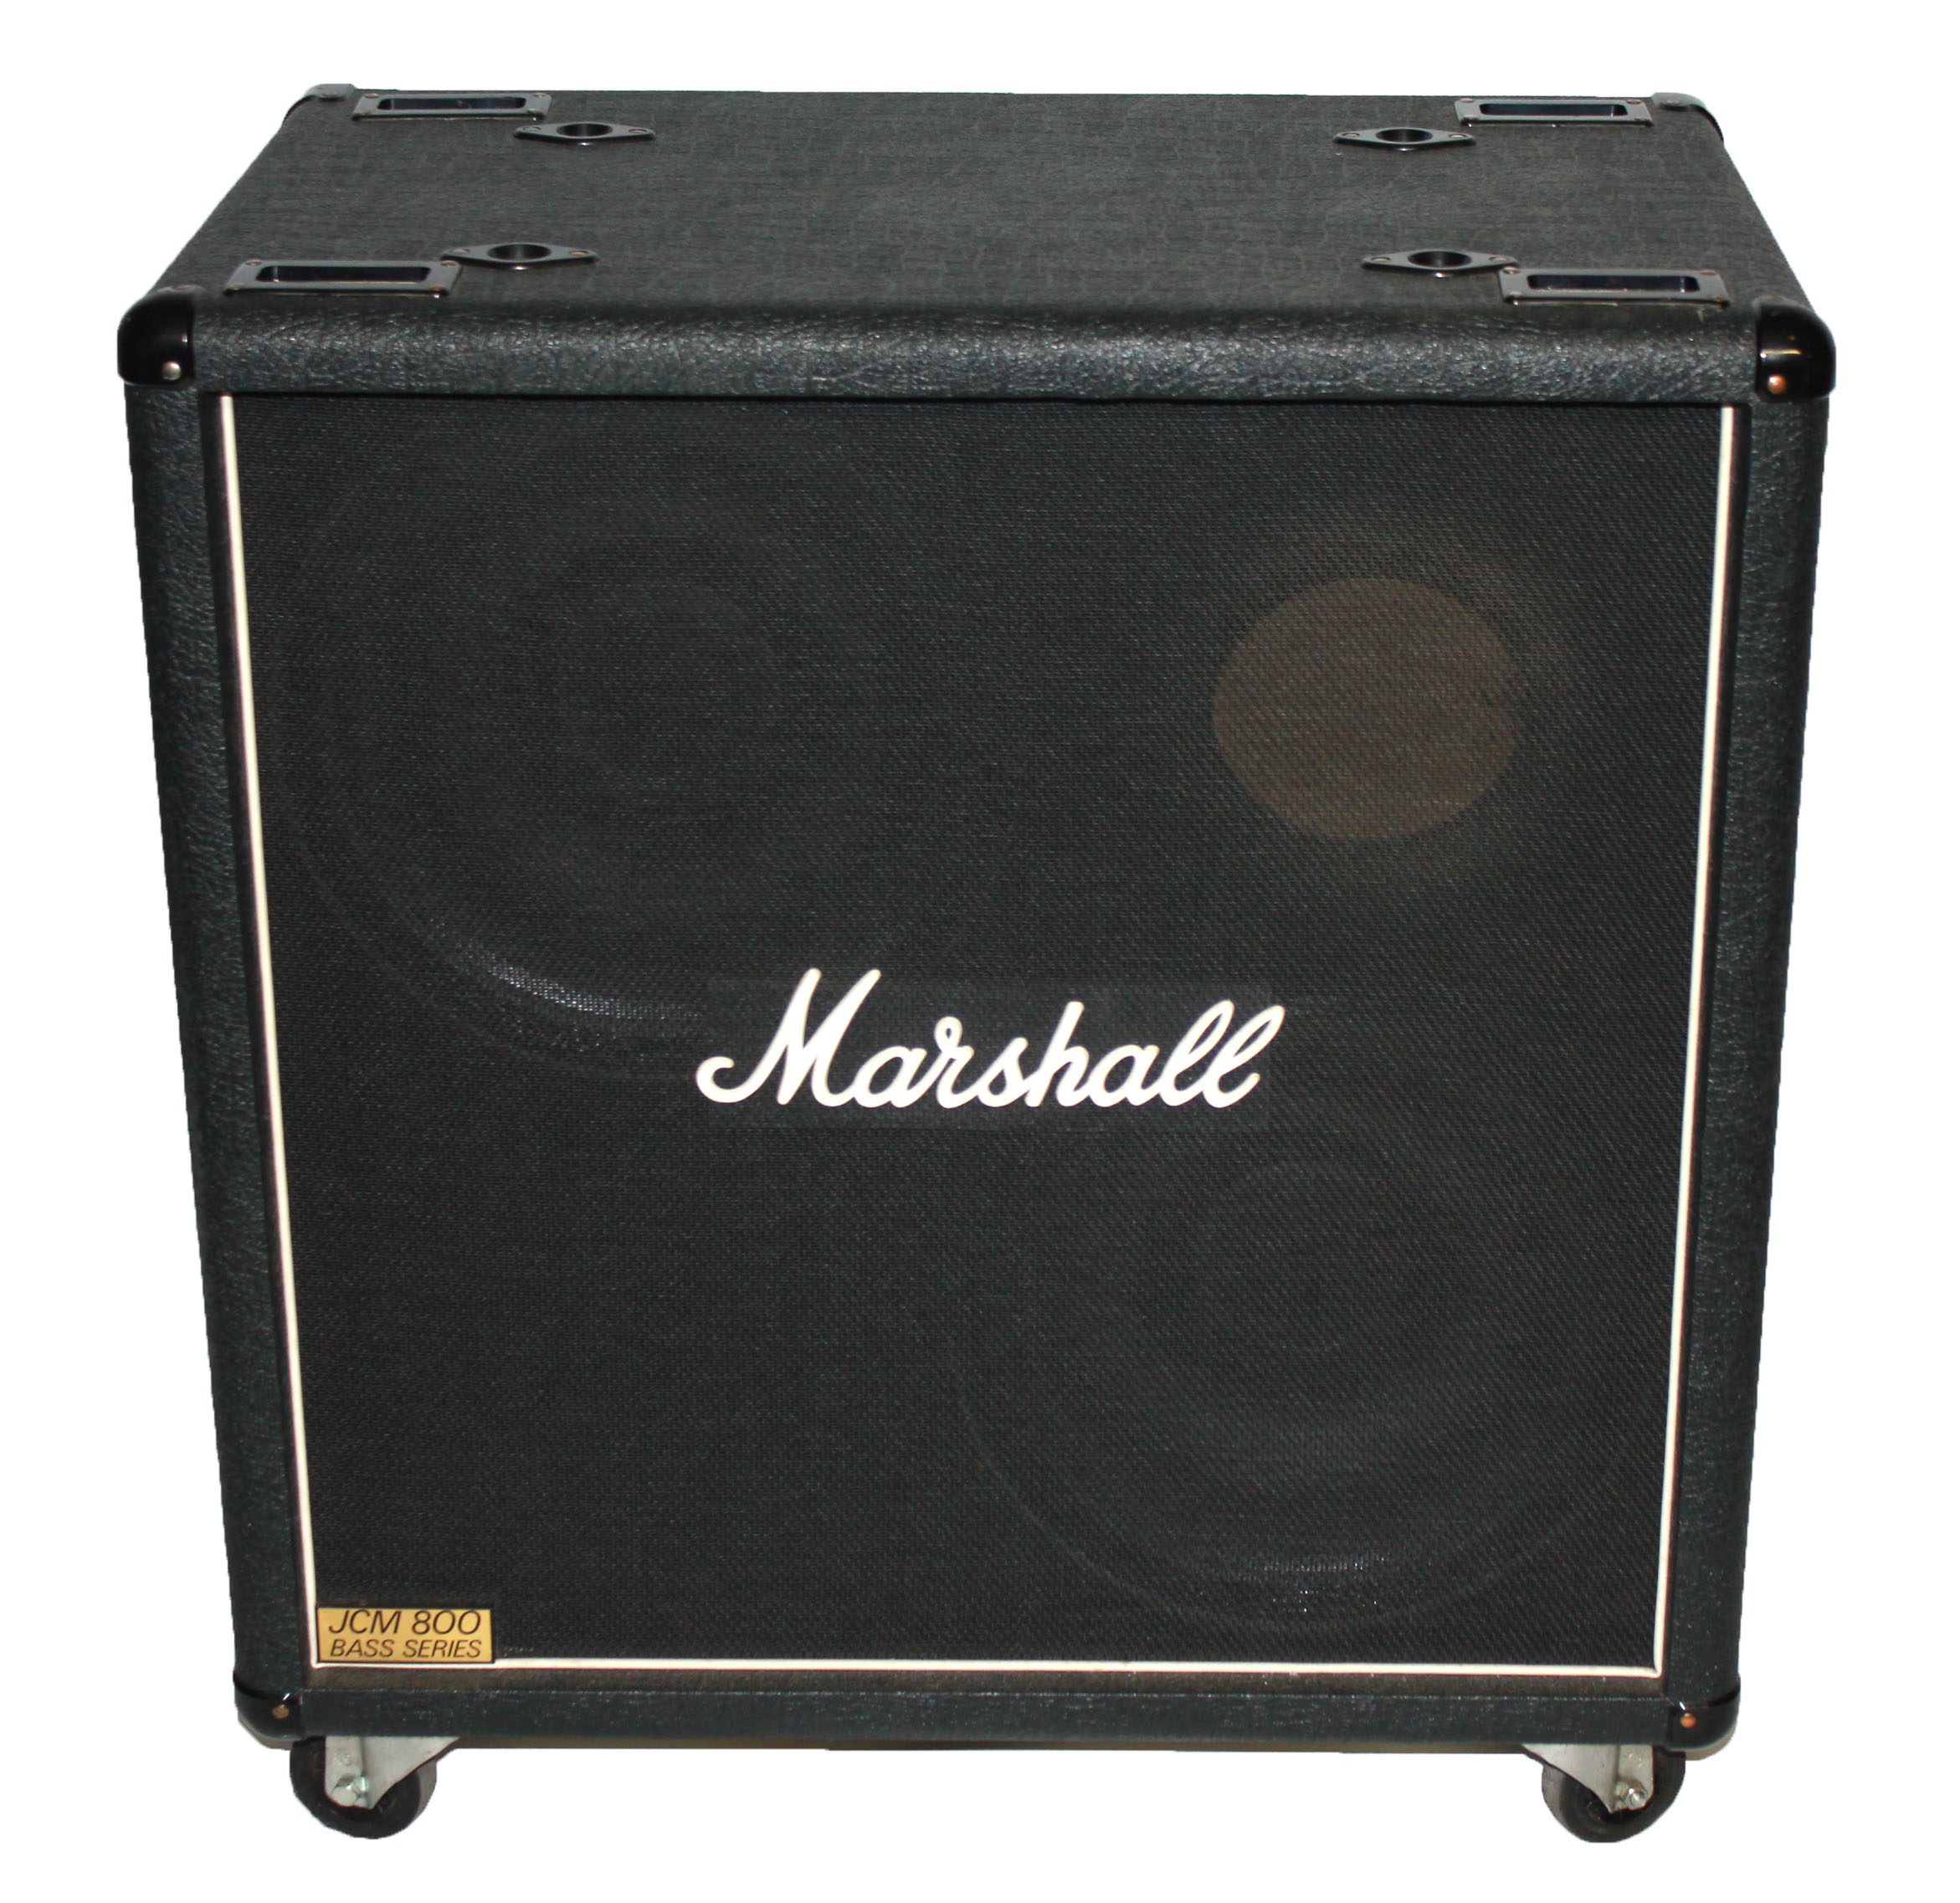 A MARSHALL JCM 800 BASS SERIES SPEAKER The matt black cabinet with carrying handles and castors. - Image 2 of 3